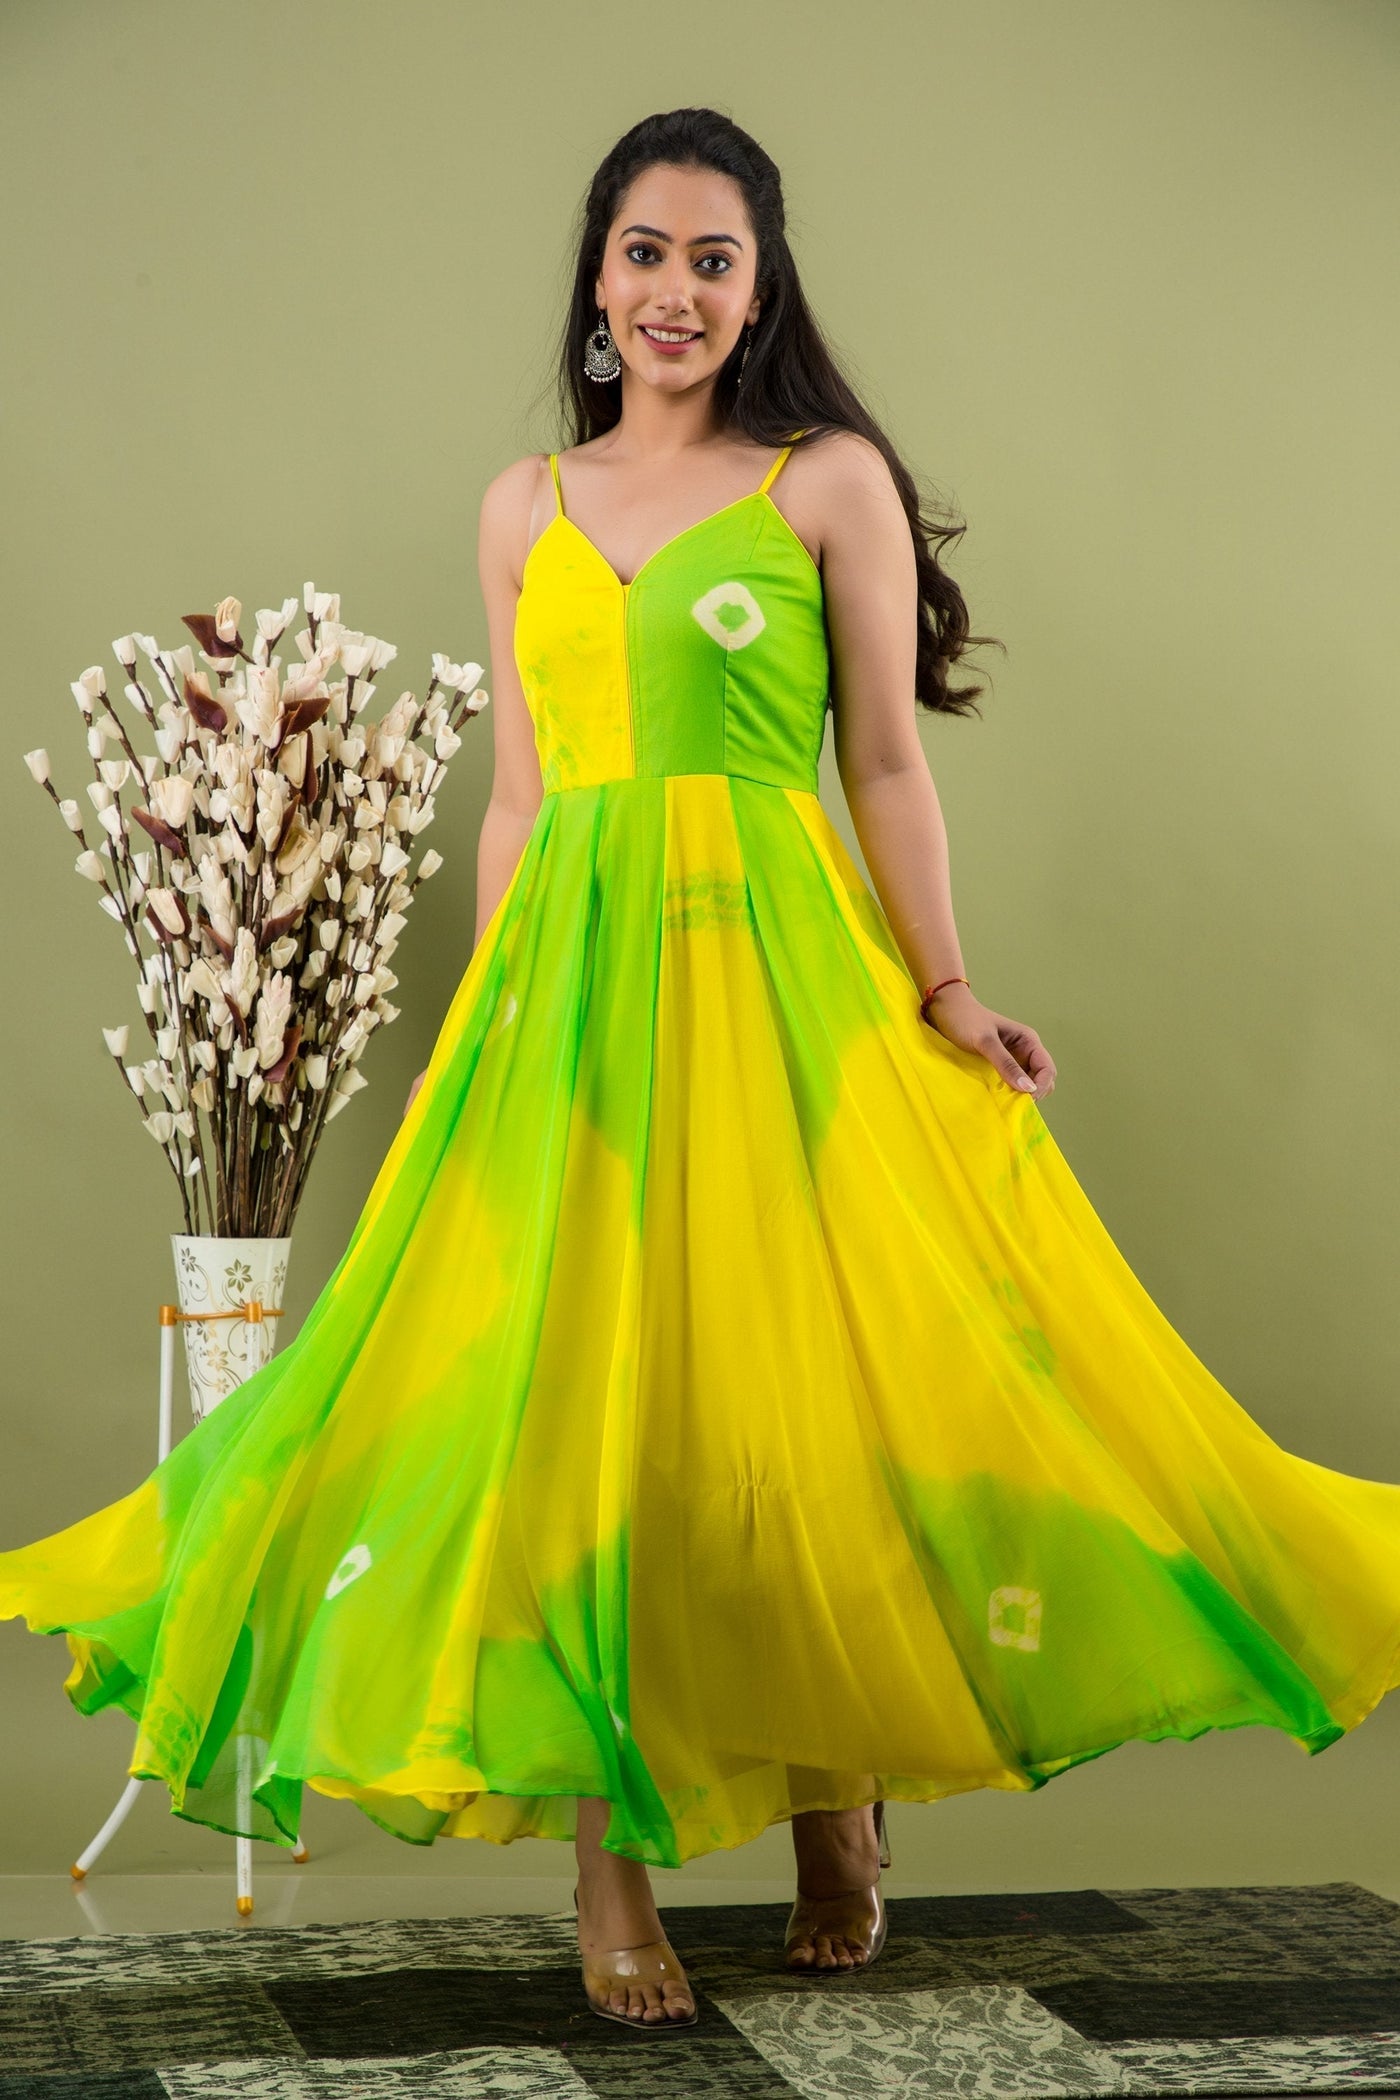 Women's Yellow and Green Tie Dye A-Line Maxi Dress by SARAS THE LABEL (1 Pc Set)